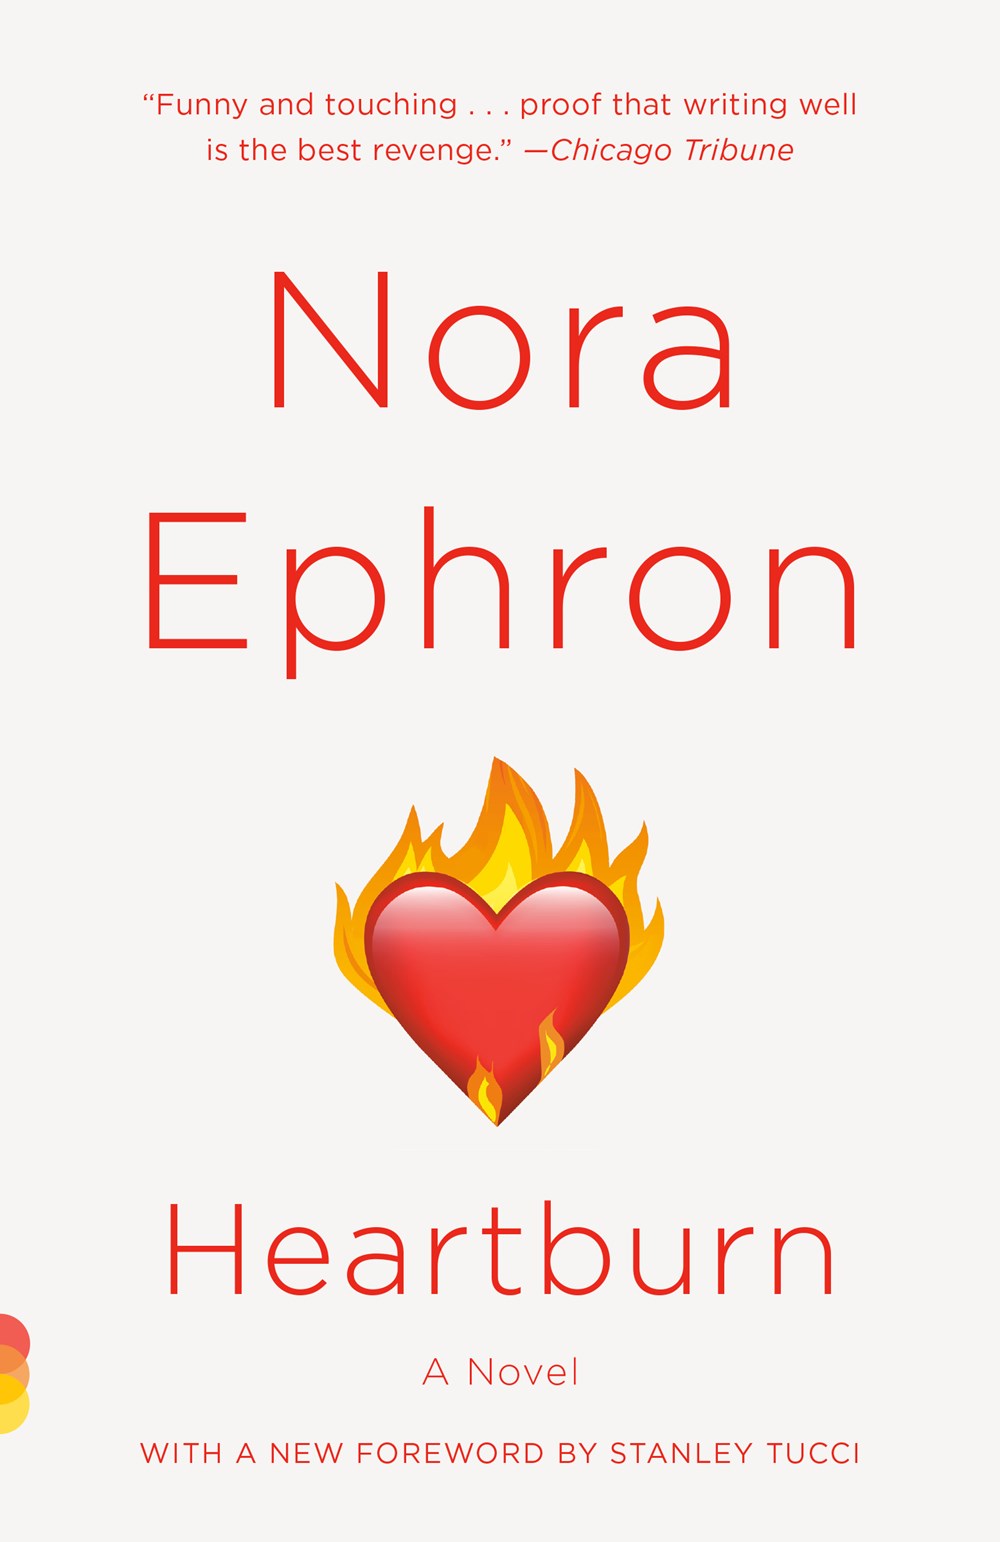 Heartburn by Nora Ephron (40th Anniversary Edition, with a Foreword by Stanley Tucci)